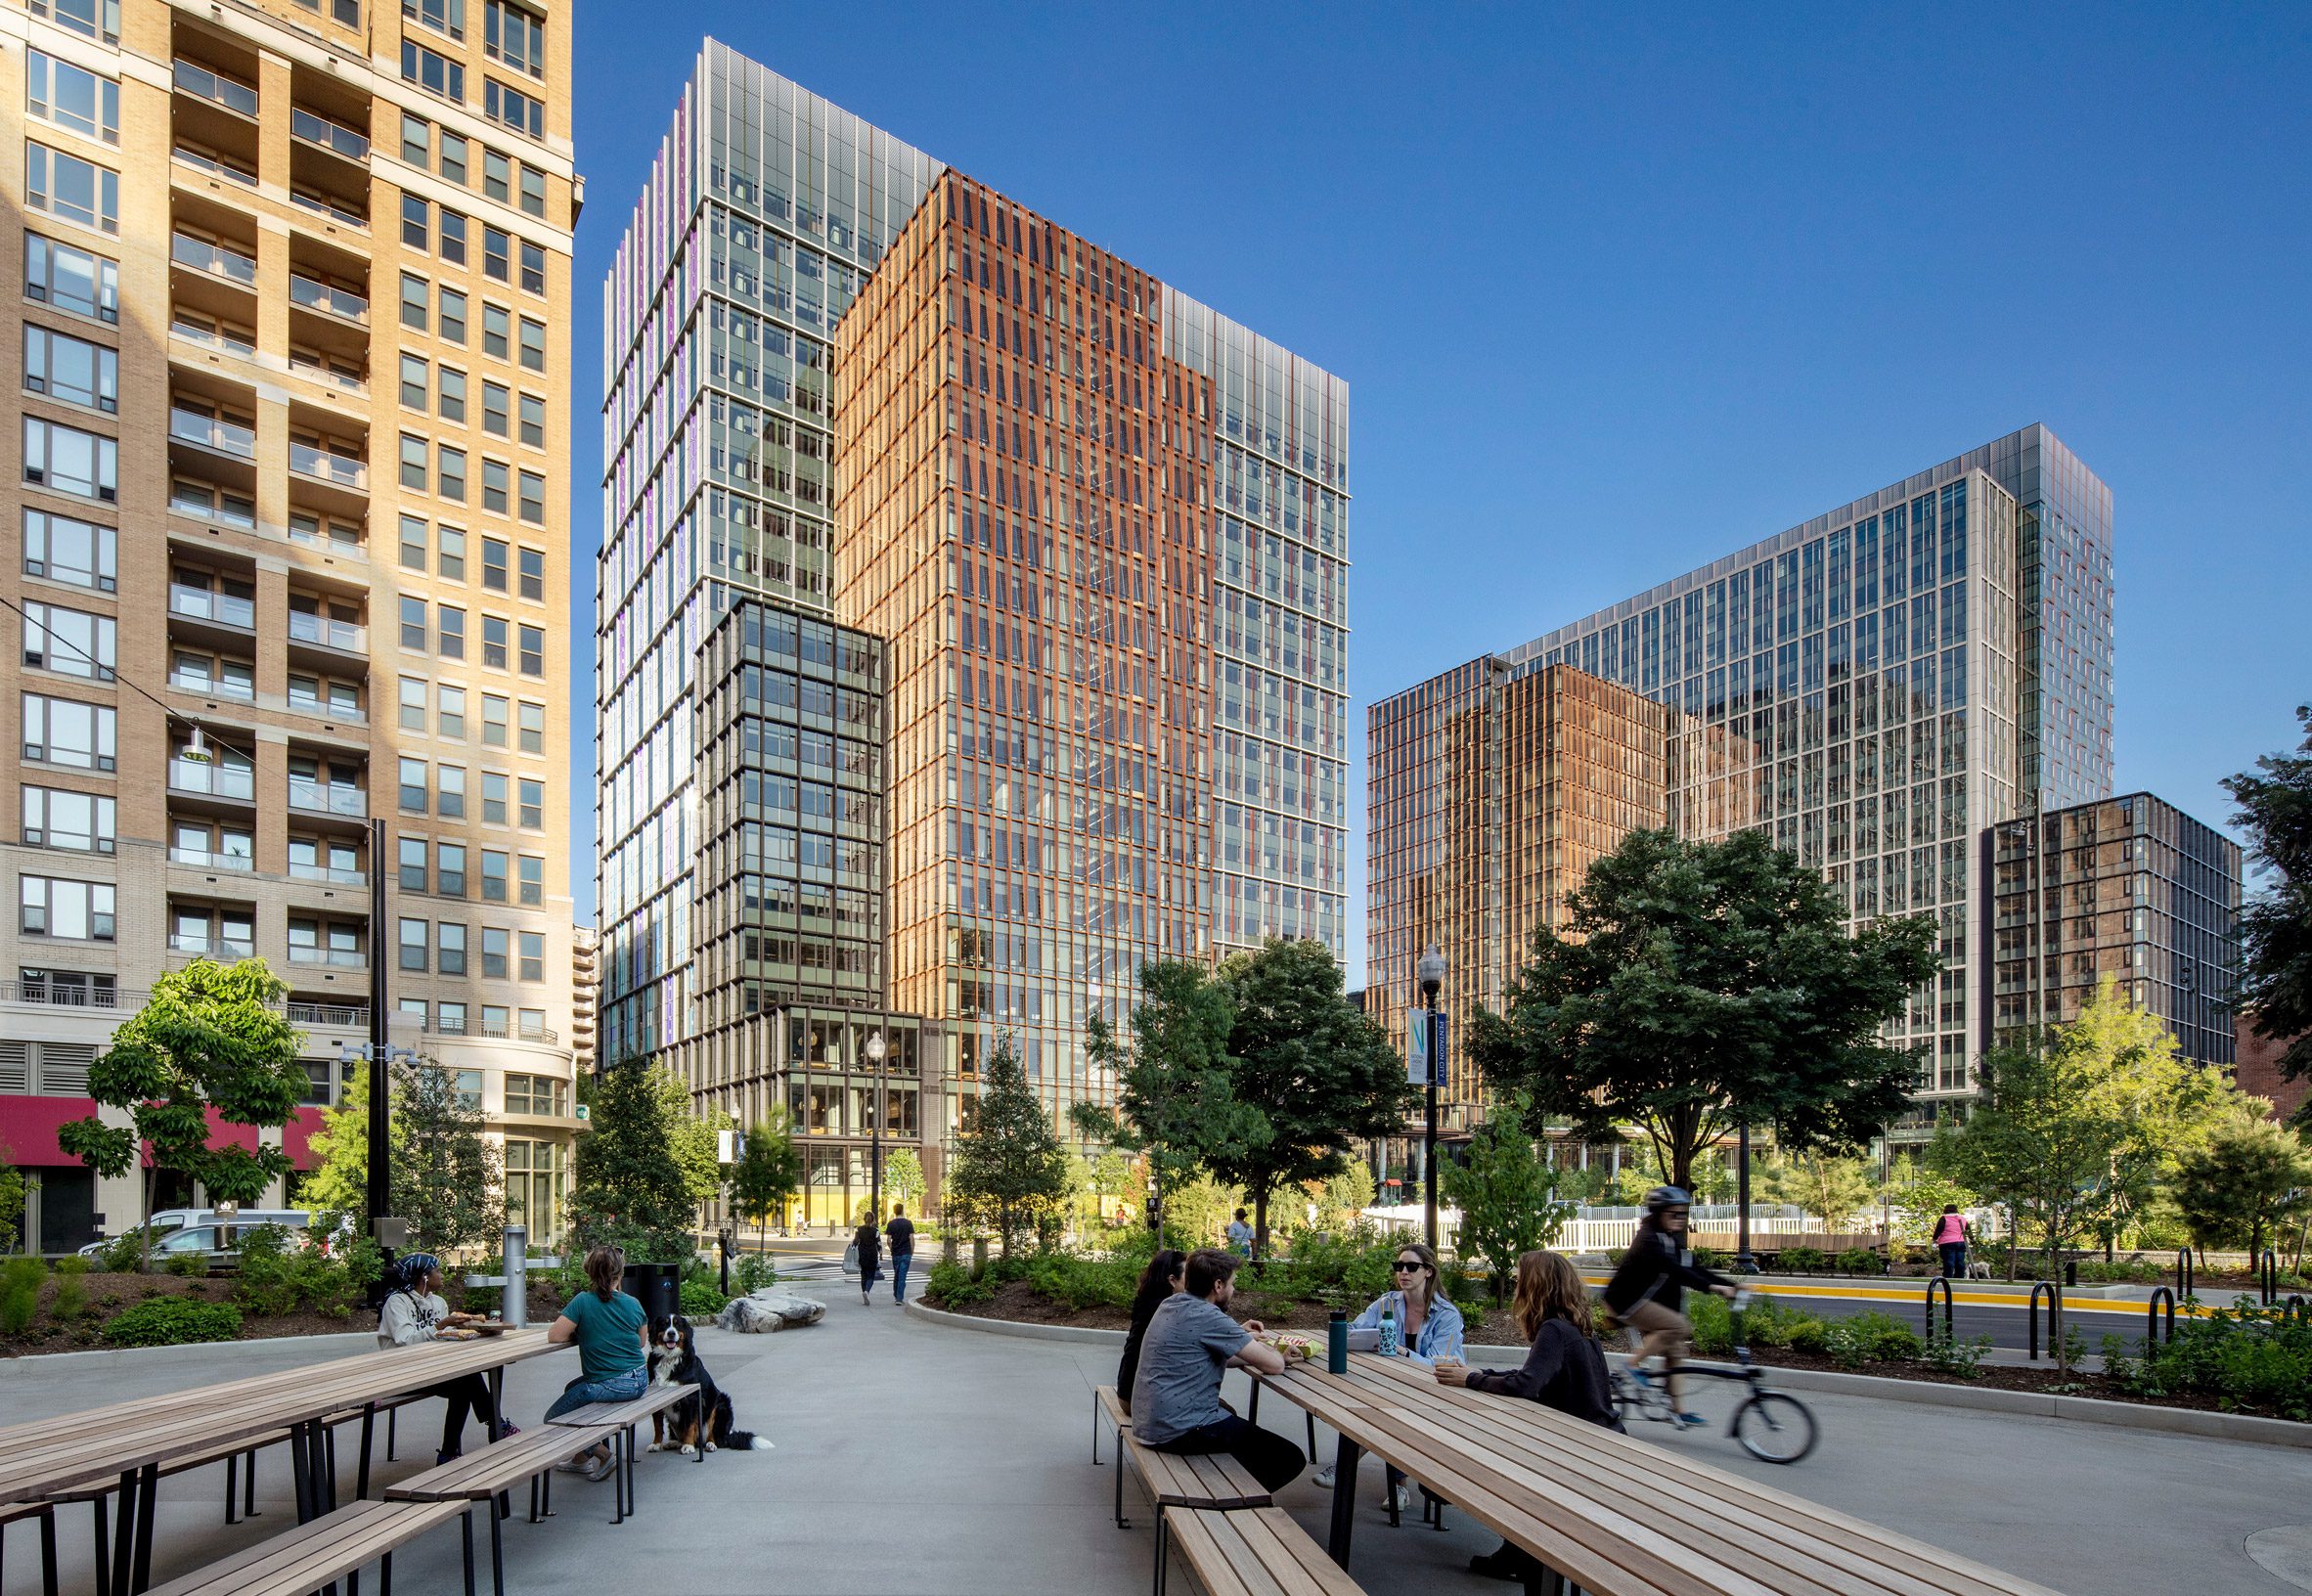 Amazon HQ2 in Arlington, Virgina by ZGF Architects and James Corner Field Operations